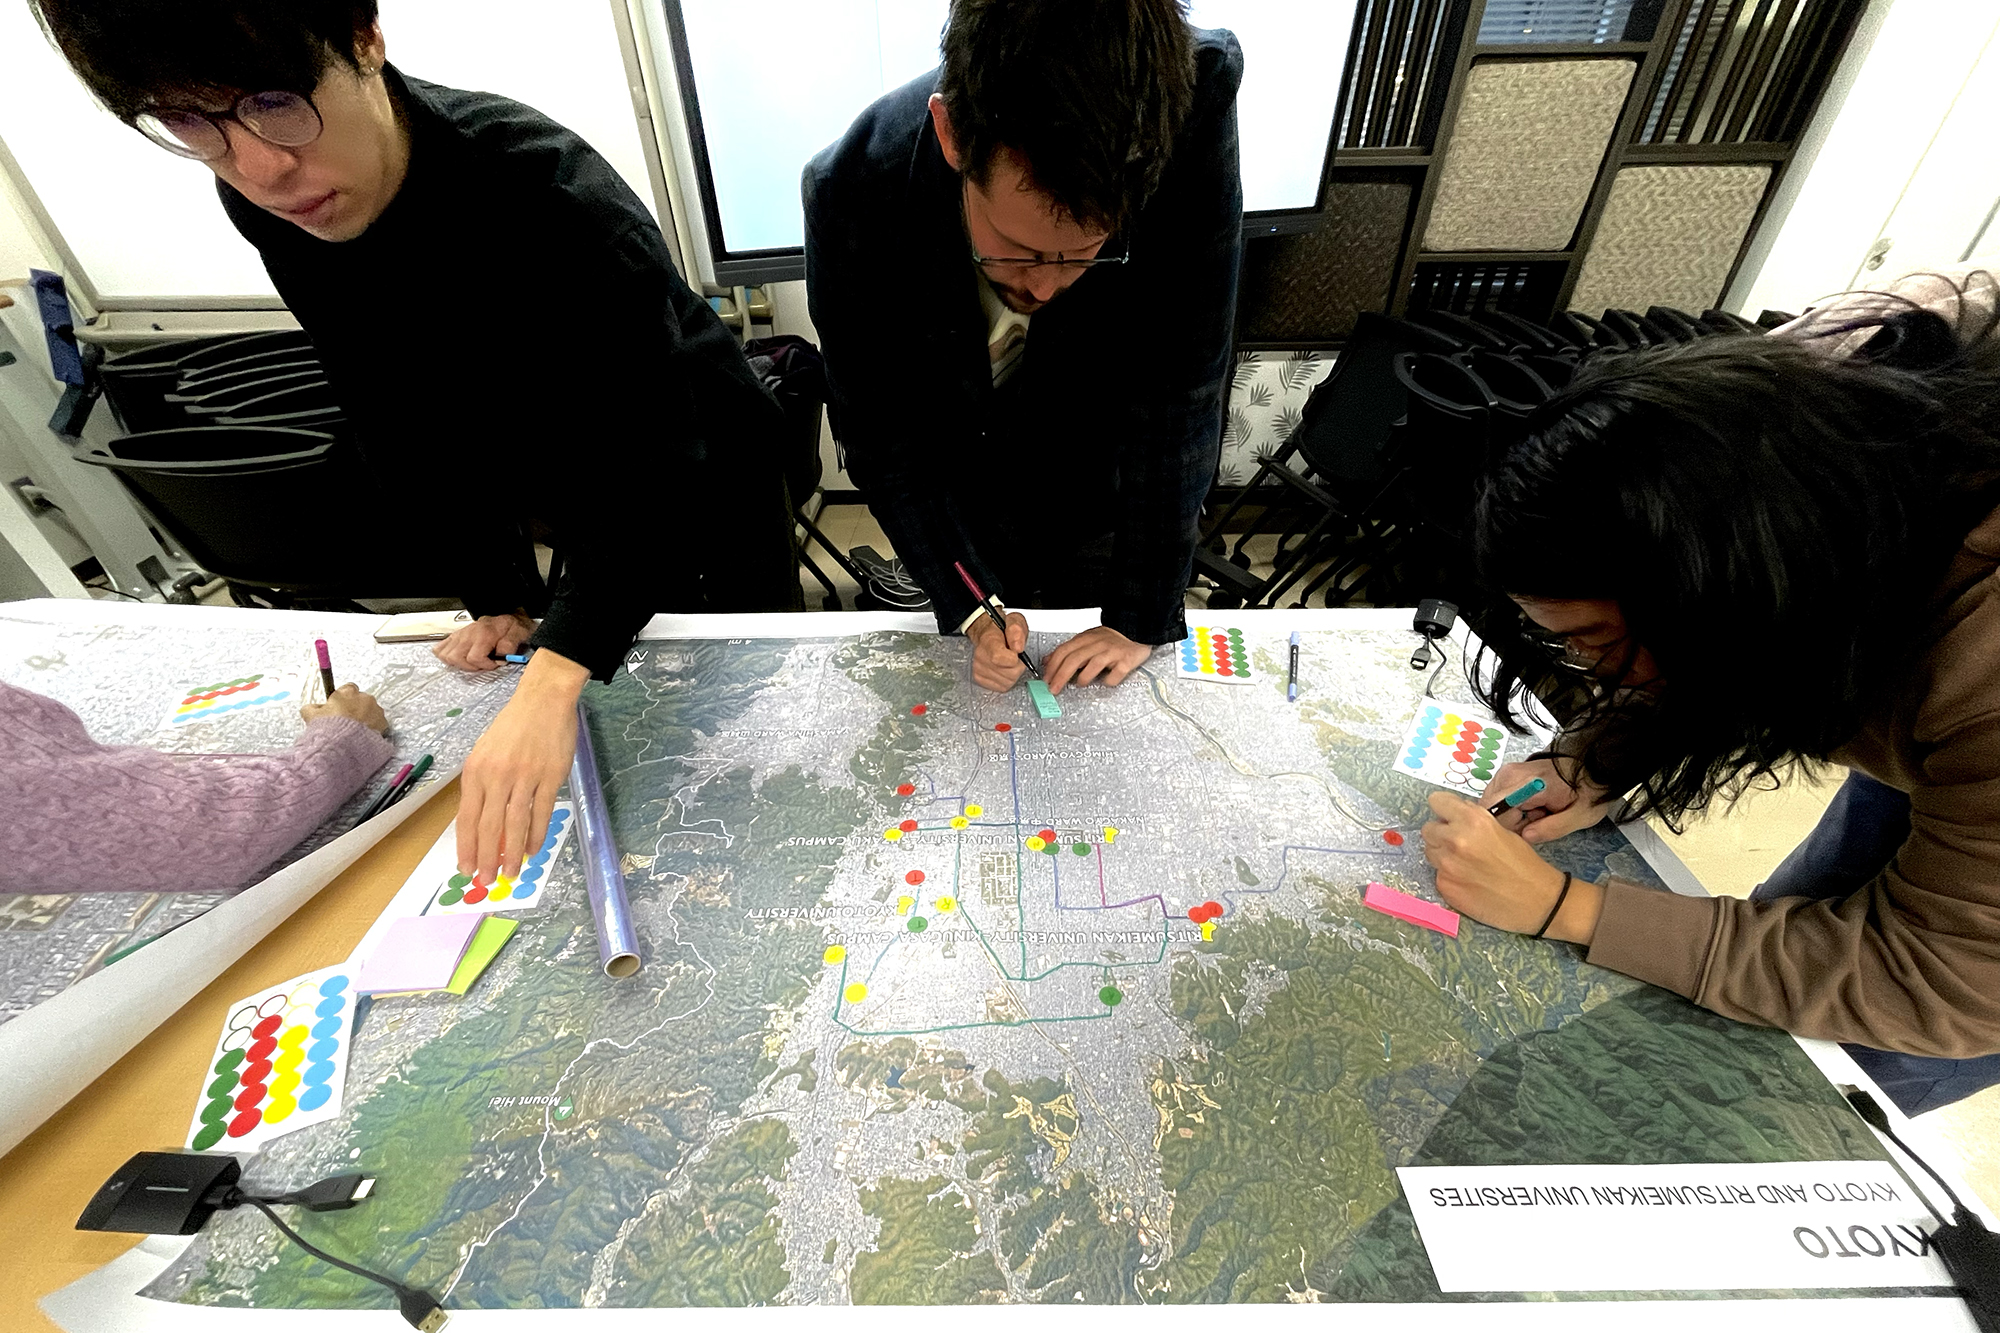 Three students work on a large map on a table.